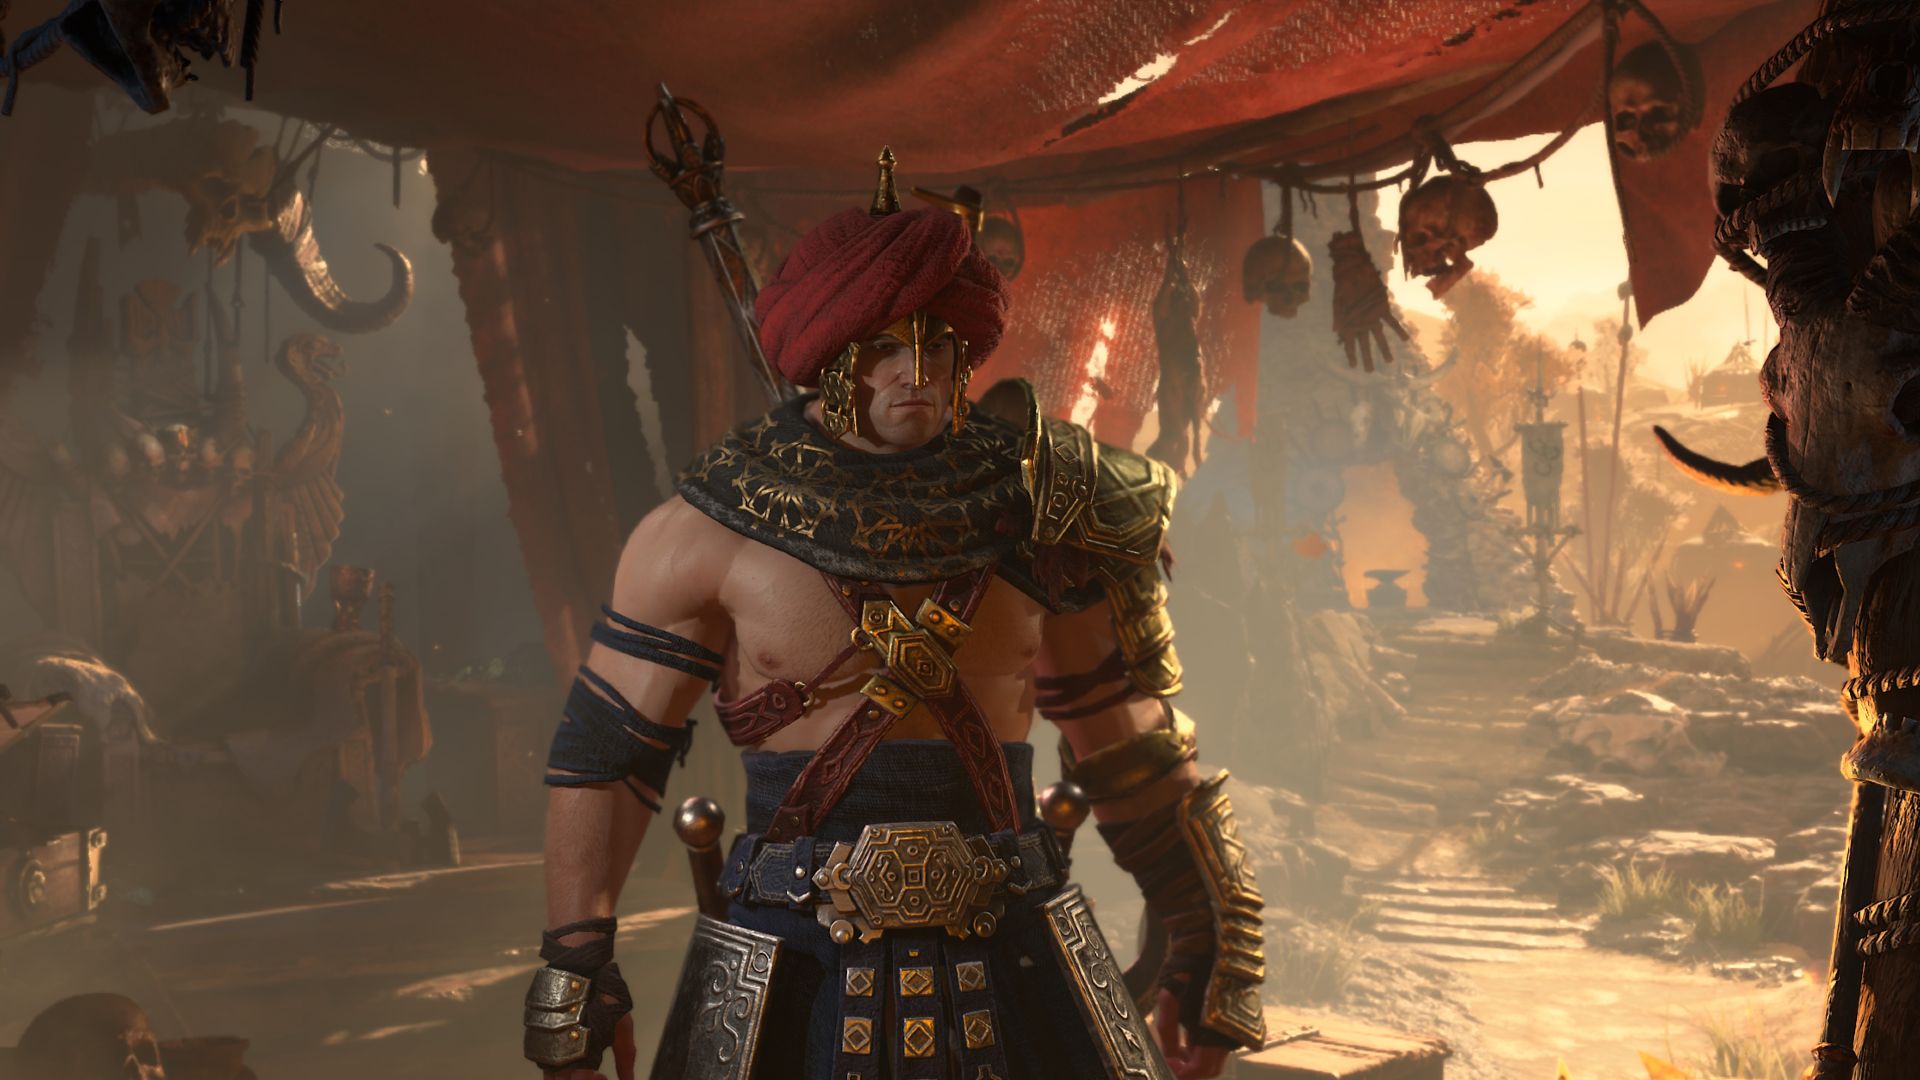 Diablo 4 release date: a barbarian in wearing a turban in the middle of a middle-eastern style market.